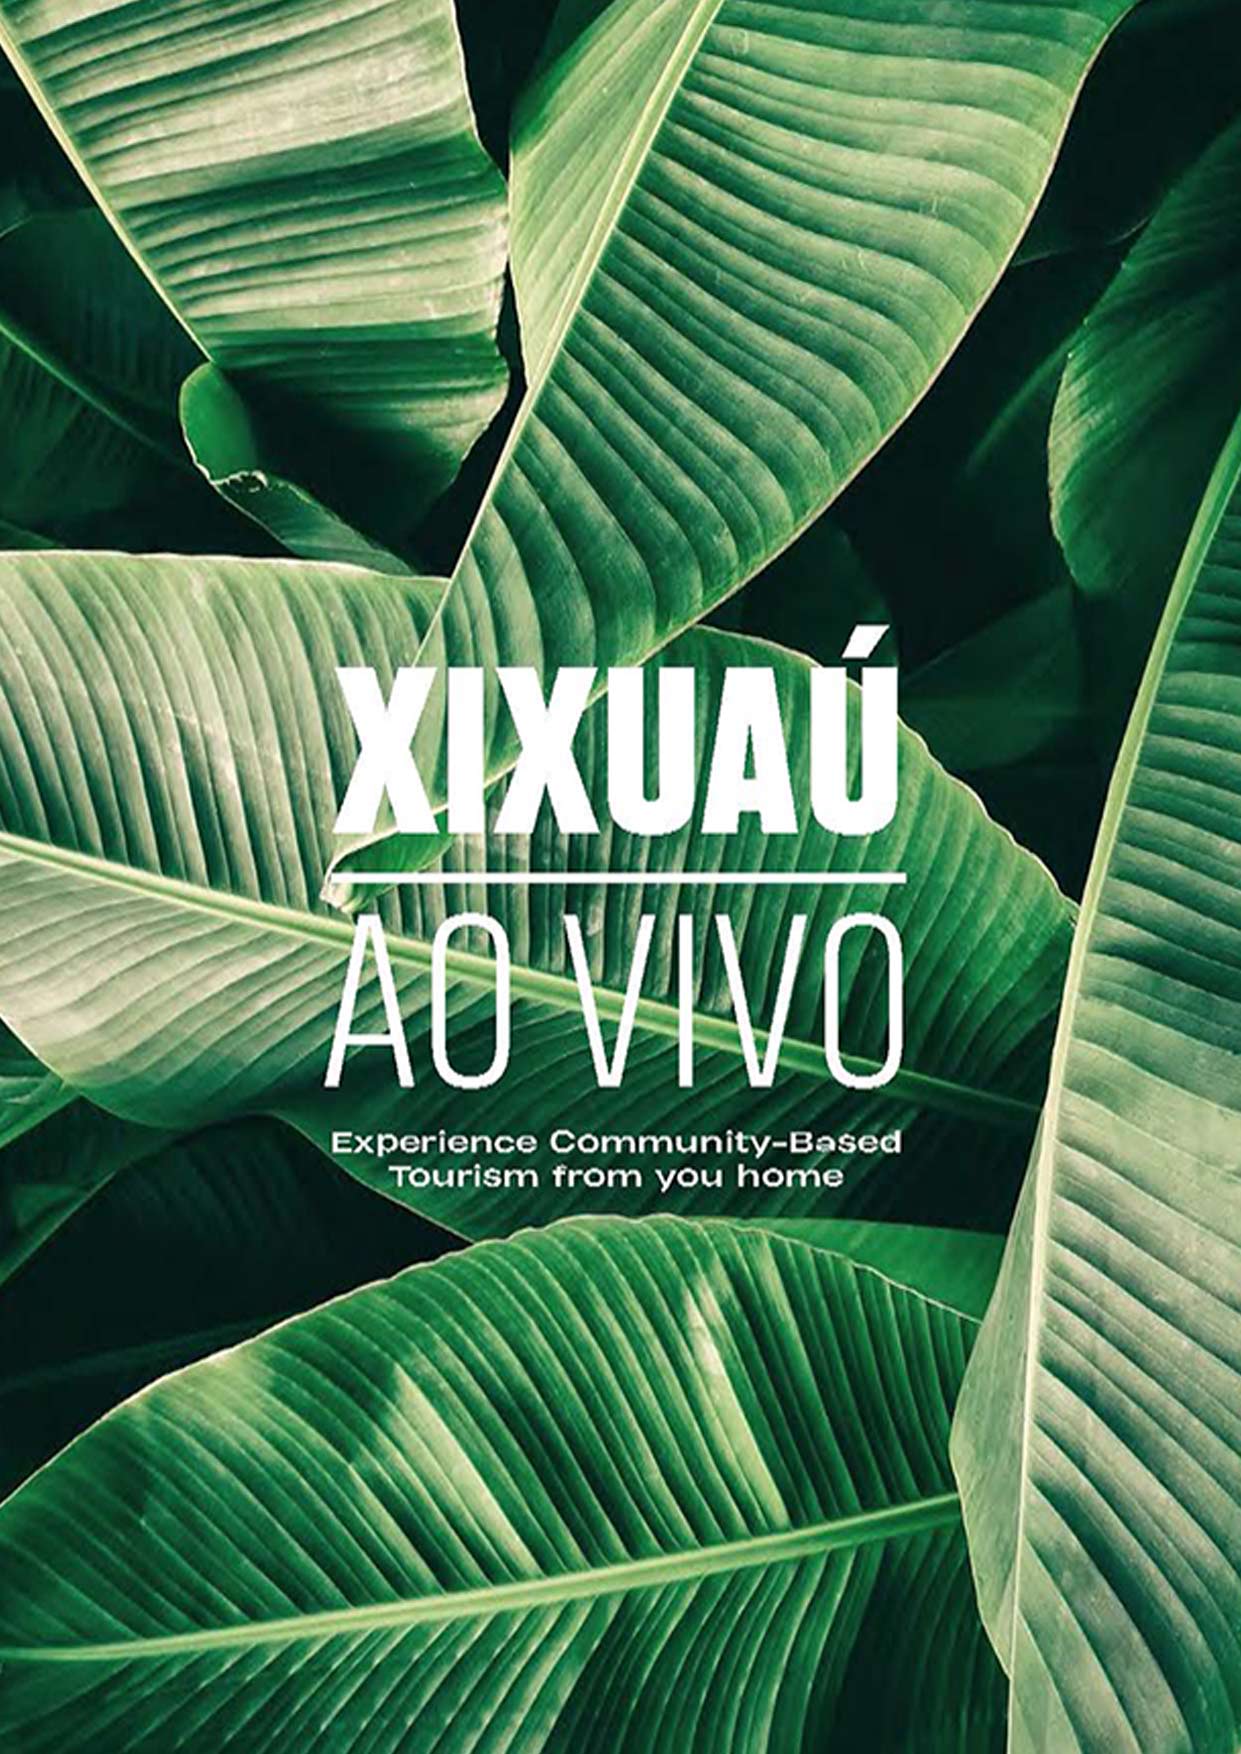 XIXUAÚ AO VIVO Experience Community-Based Tourism from your home